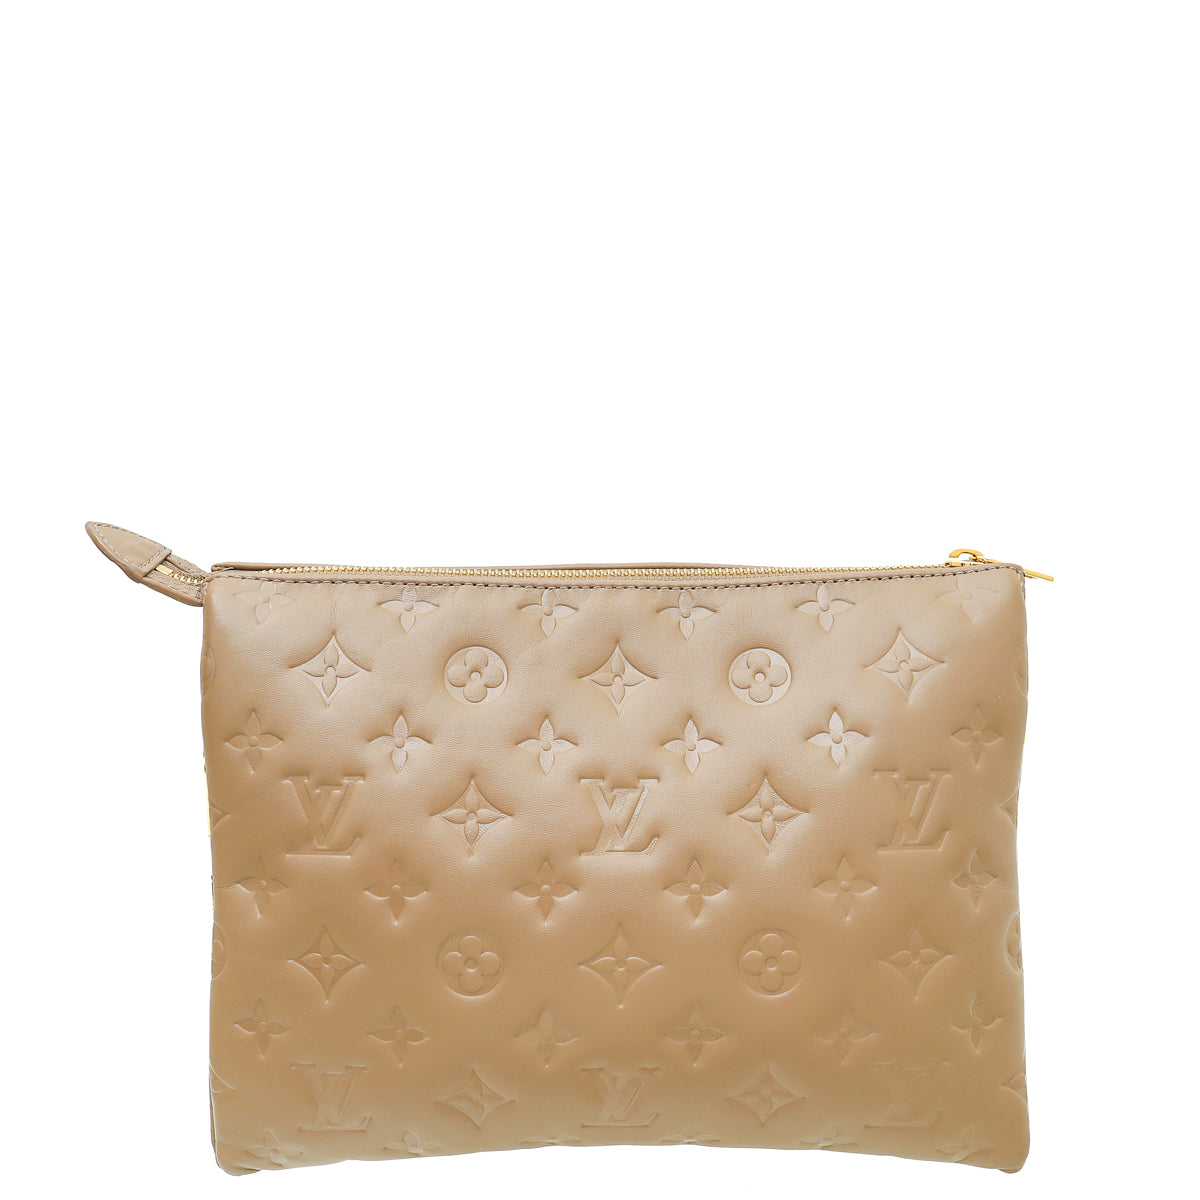 Louis Vuitton Taupe Embossed Monogram Coussin PM Bag